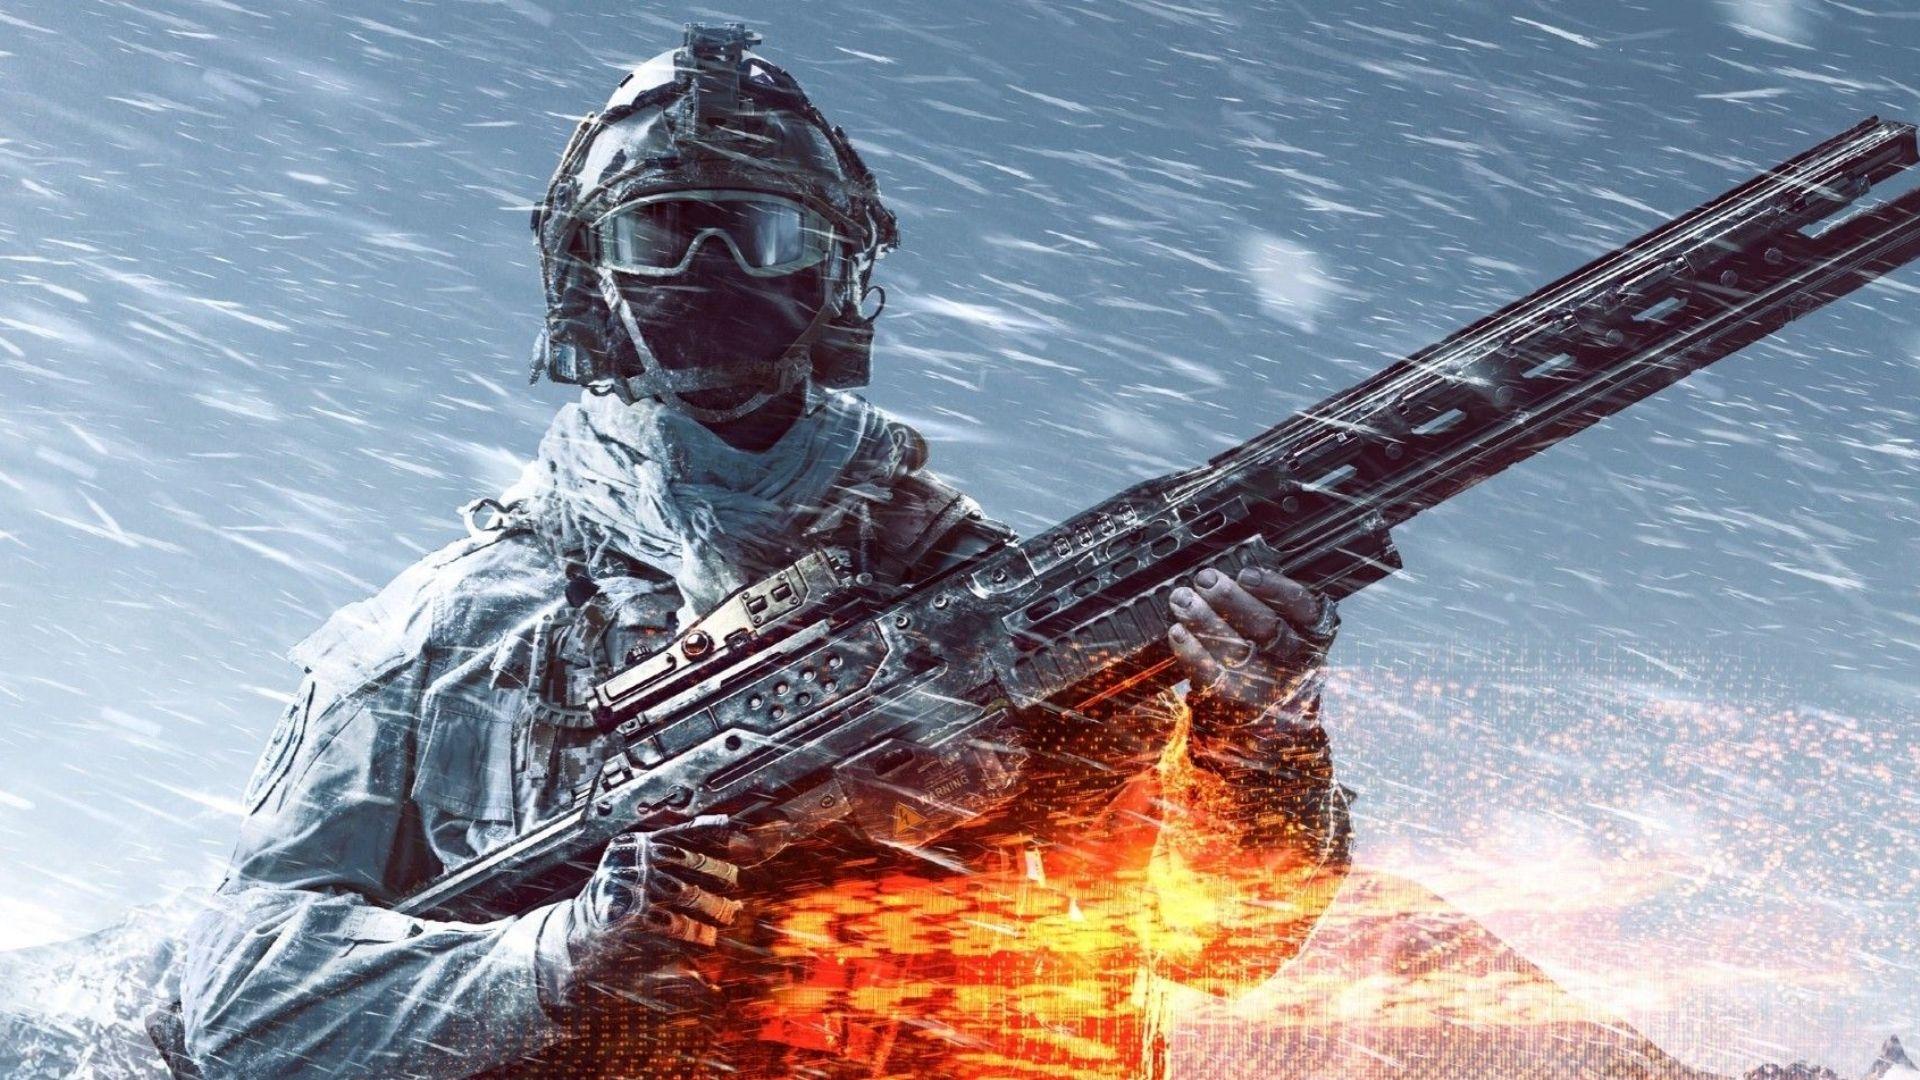 Battlefield 4 character holding a weapon